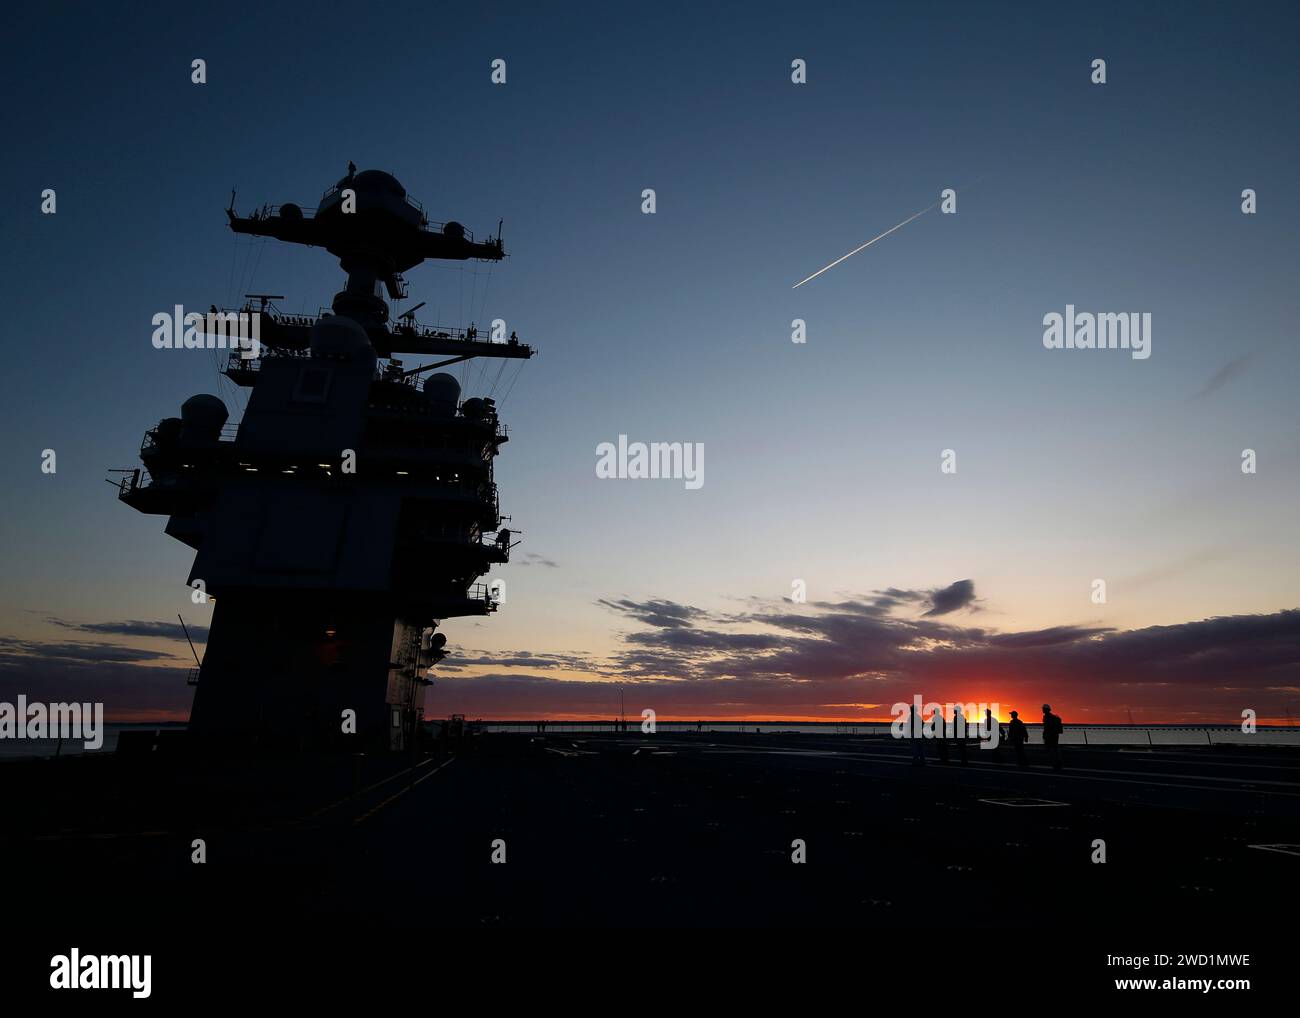 Pre-Commissioning Unit aircraft carrier Gerald R. Ford at sunset in Newport News, Virginia. Stock Photo